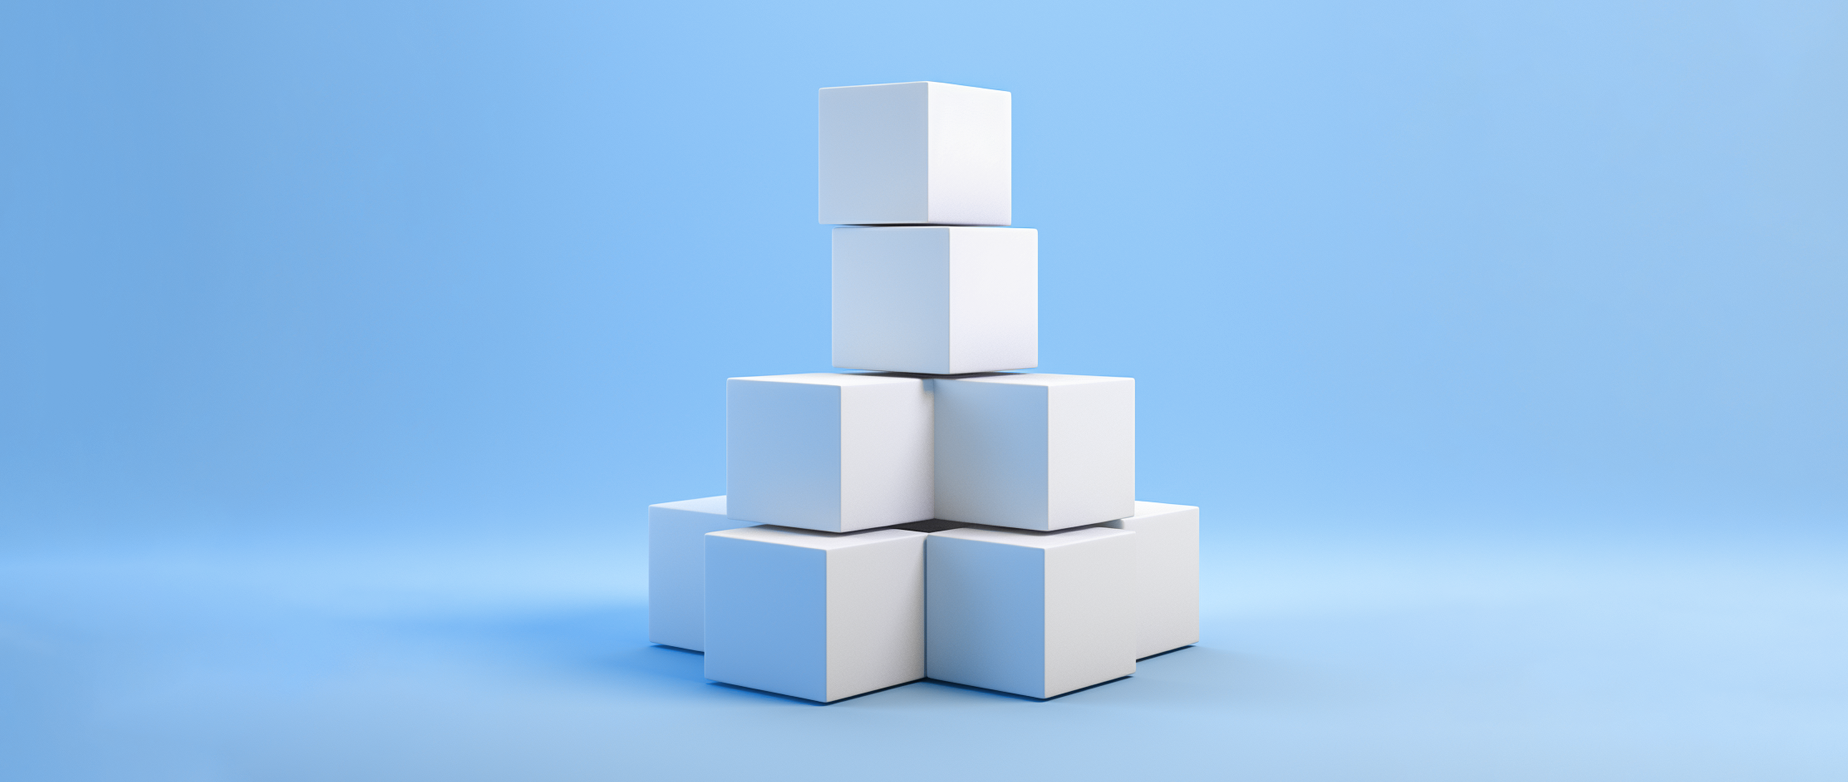 a bunch of white boxes stacked against blue background